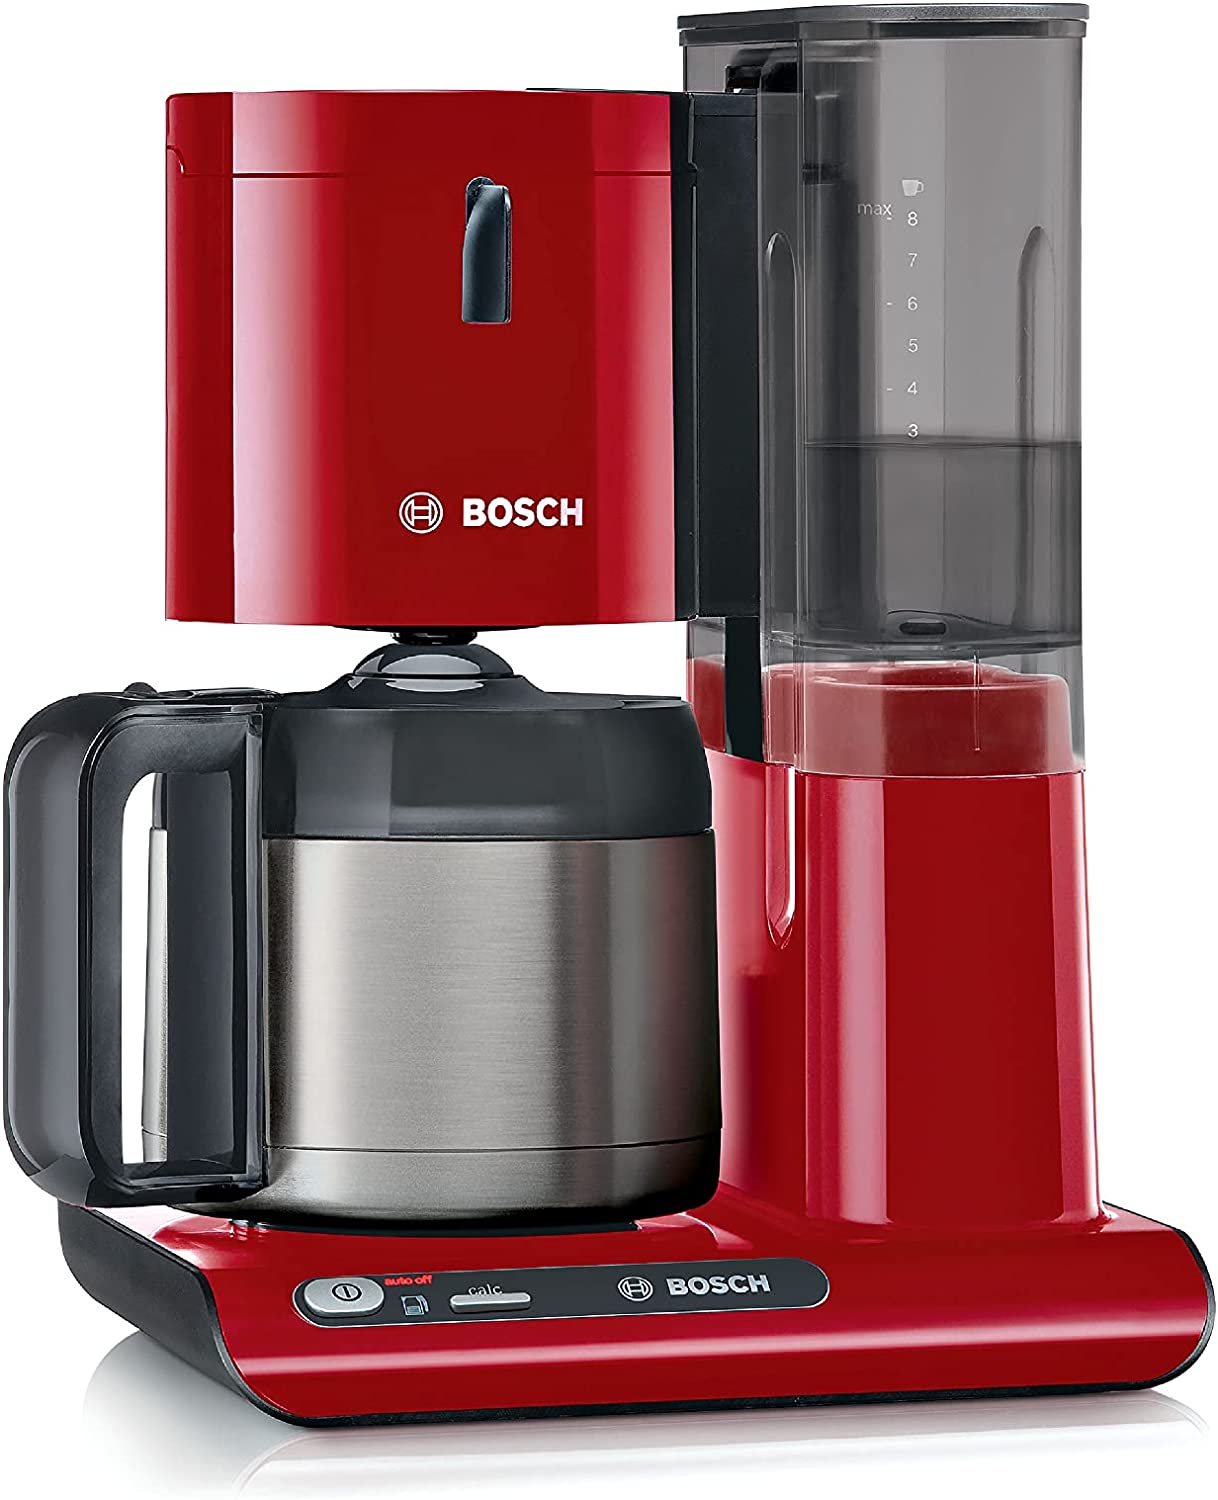 Bosch Styline TKA8A054 Filter Coffee Machine, Stainless Steel Thermal Jug 1.1 L, for 8-12 Cups, Removable Water Tank, Drip Stop, Swivel Filter Carrier, Cable Storage, 1100 W, Red